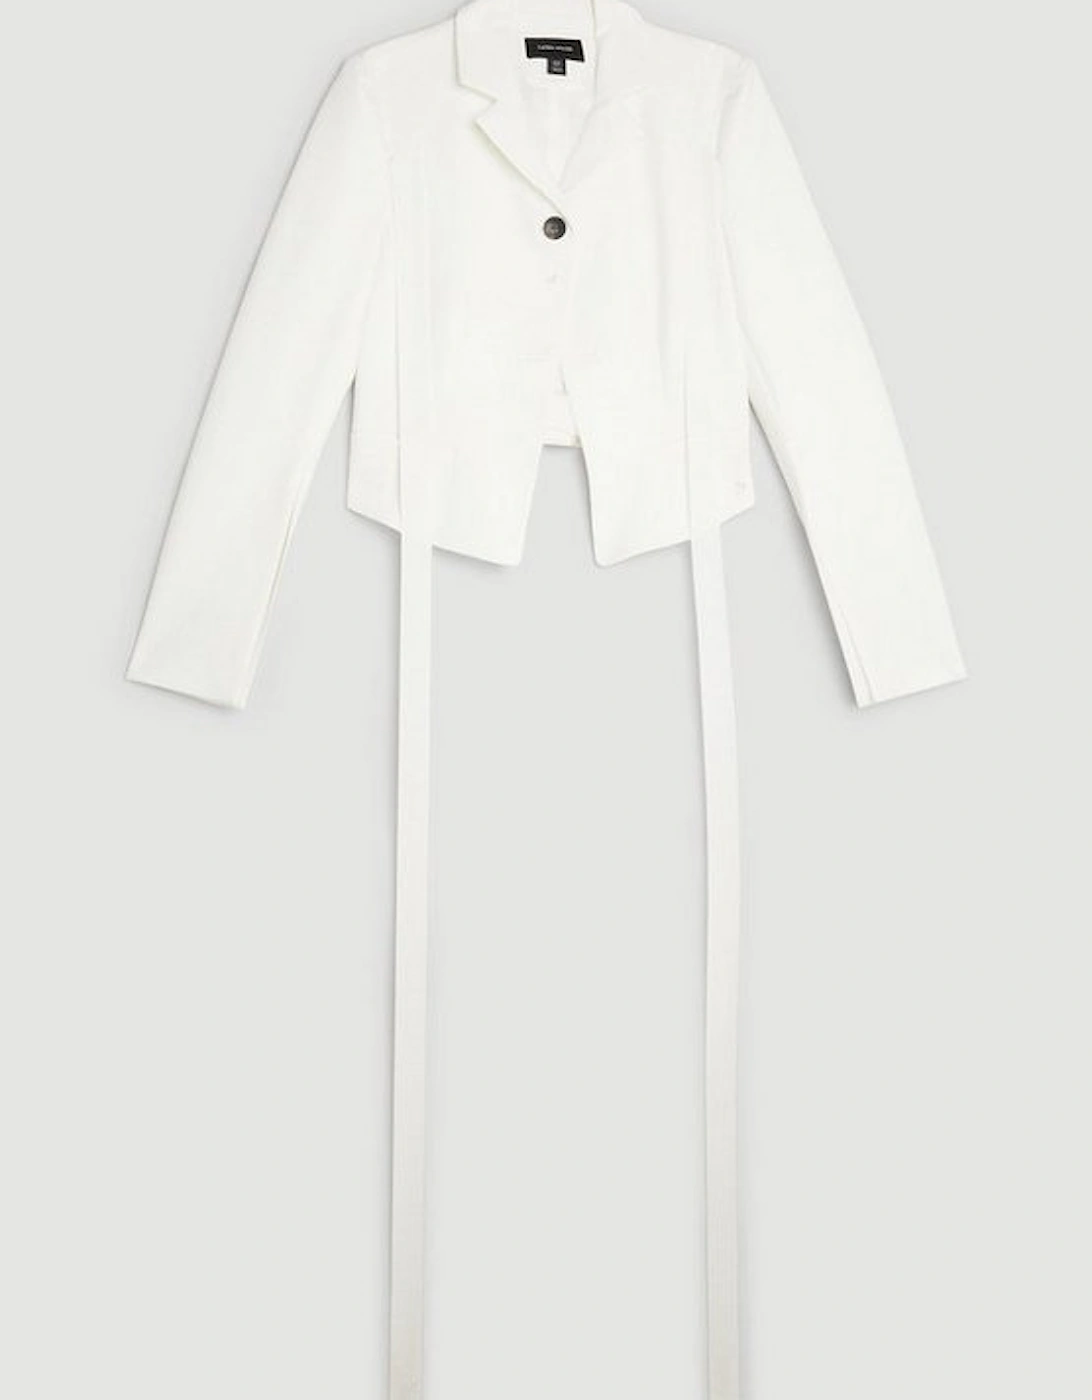 The Founder Tailored Compact Stretch Tie Detail Jacket